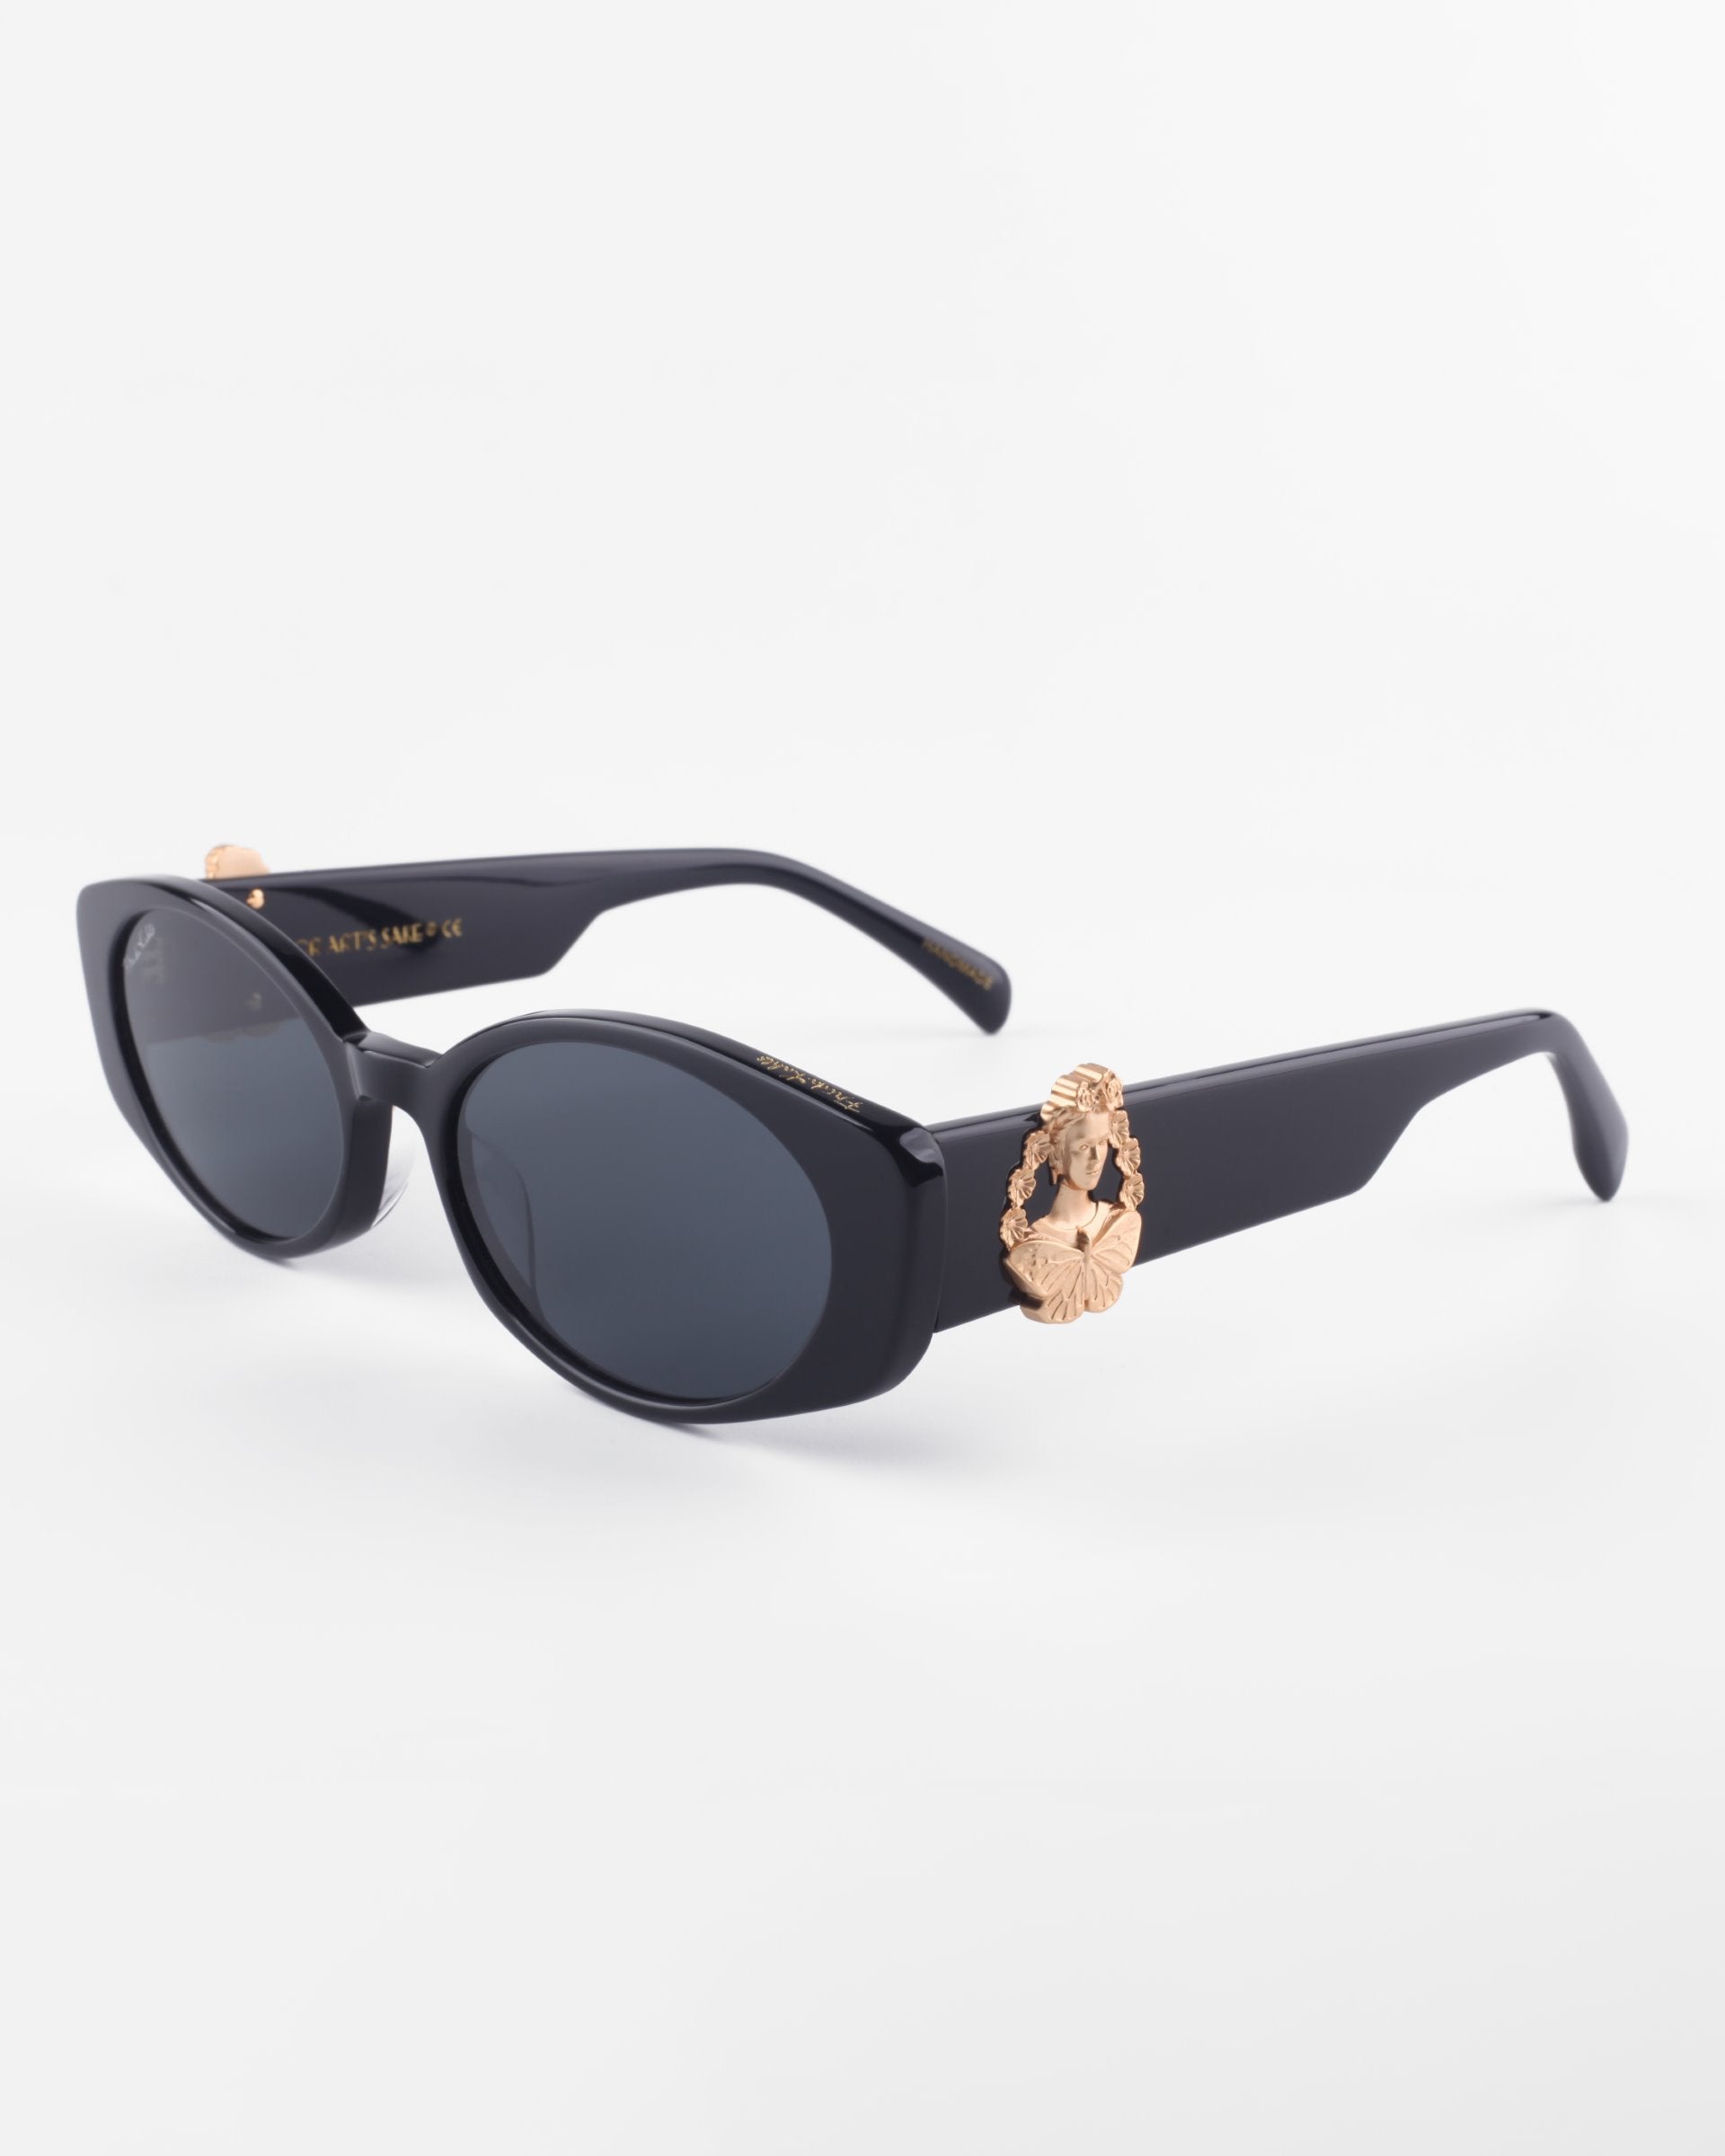 A pair of black, oval-shaped Frida Portrait sunglasses with dark lenses by For Art's Sake®. The sunglasses feature an 18-karat gold-plated decorative element on the temples, resembling a stylized, ornate design. The ultra-lightweight Nylon lenses offer 100% UVA & UVB protection. The arms are wide and the frame is glossy. The background is plain white.